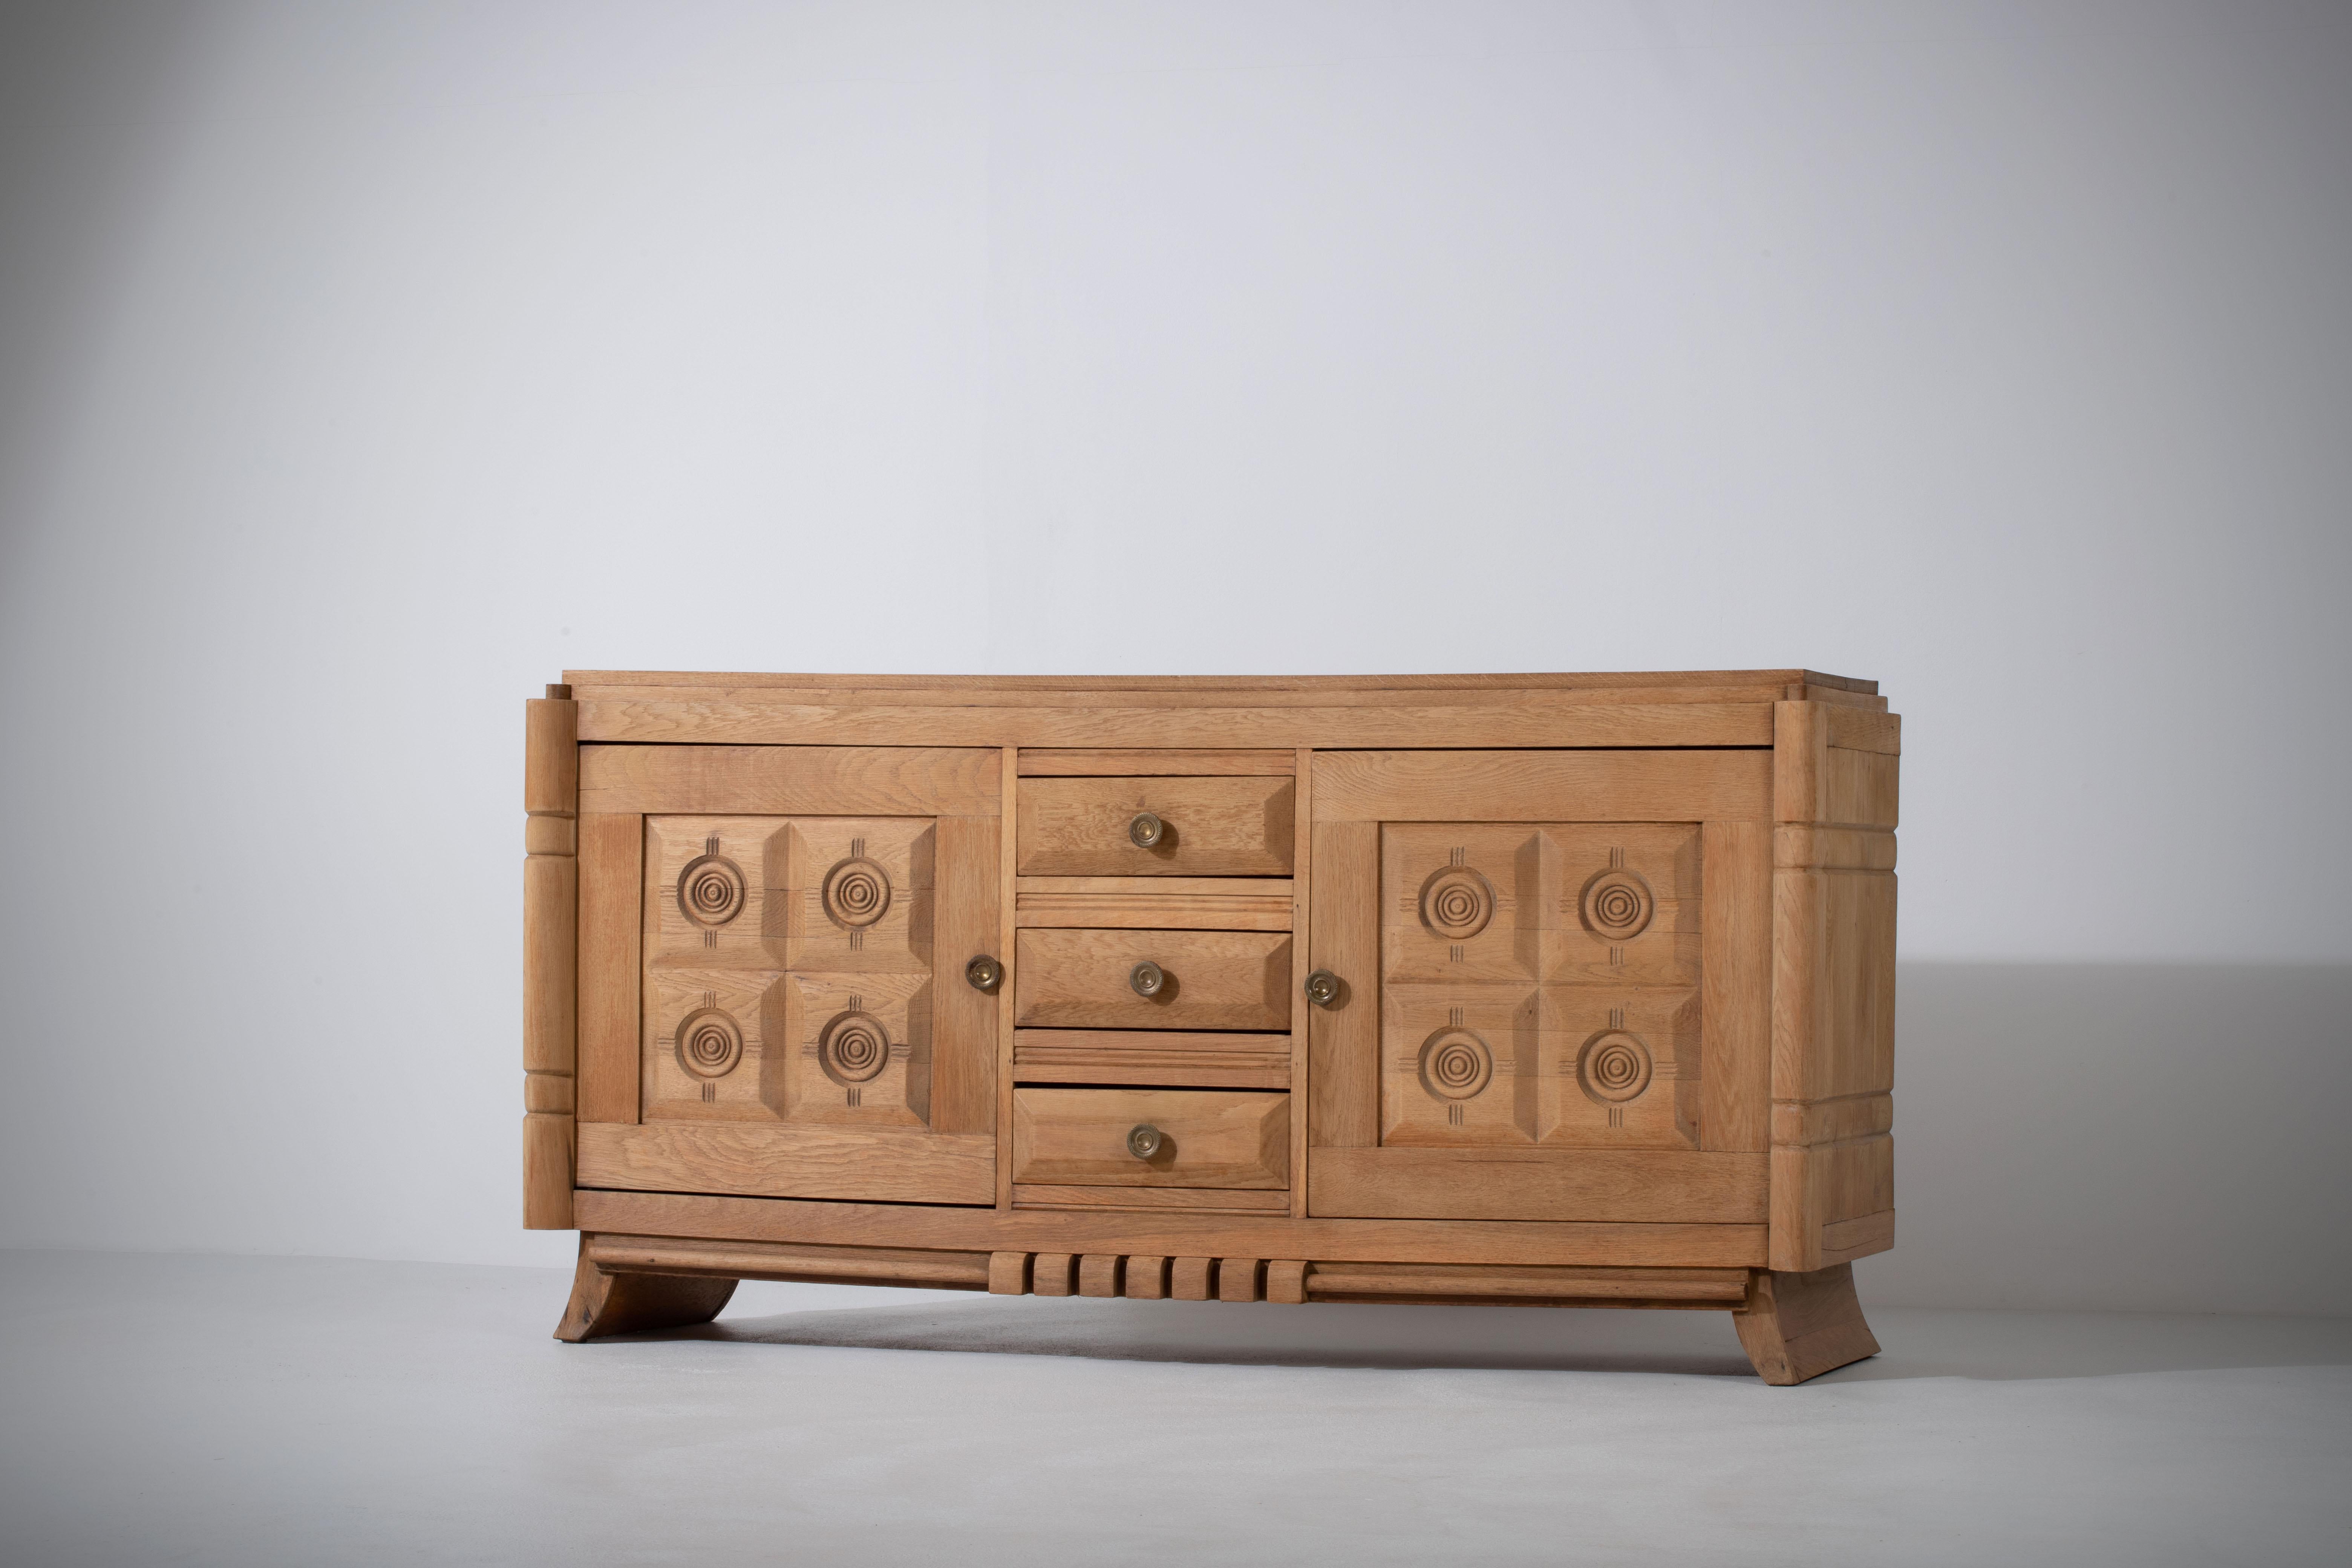 Credenza, solid oak, France, 1940s.
Art Deco Brutalist sideboard. 
The credenza consists of two storage facilities and covered with very detailed designed doors and in the center, a drawers column.